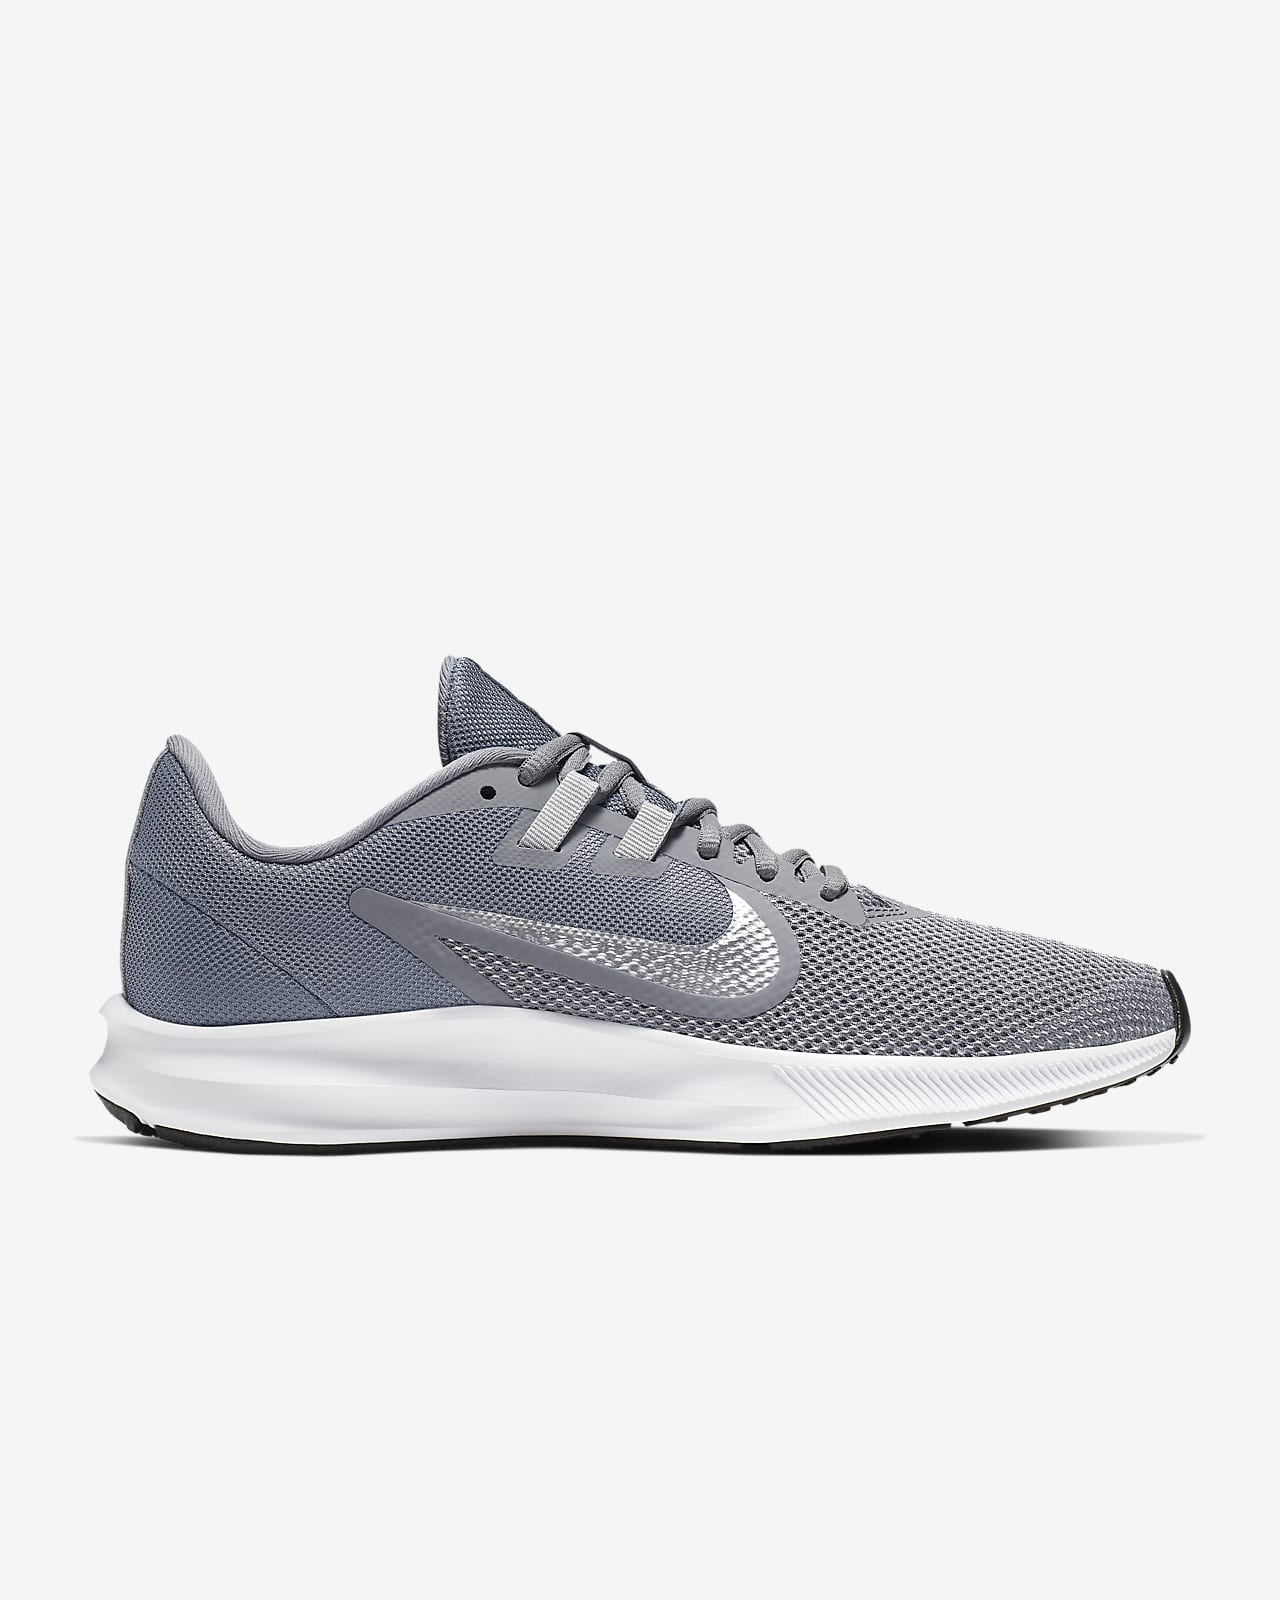 nike downshifter 9 colors